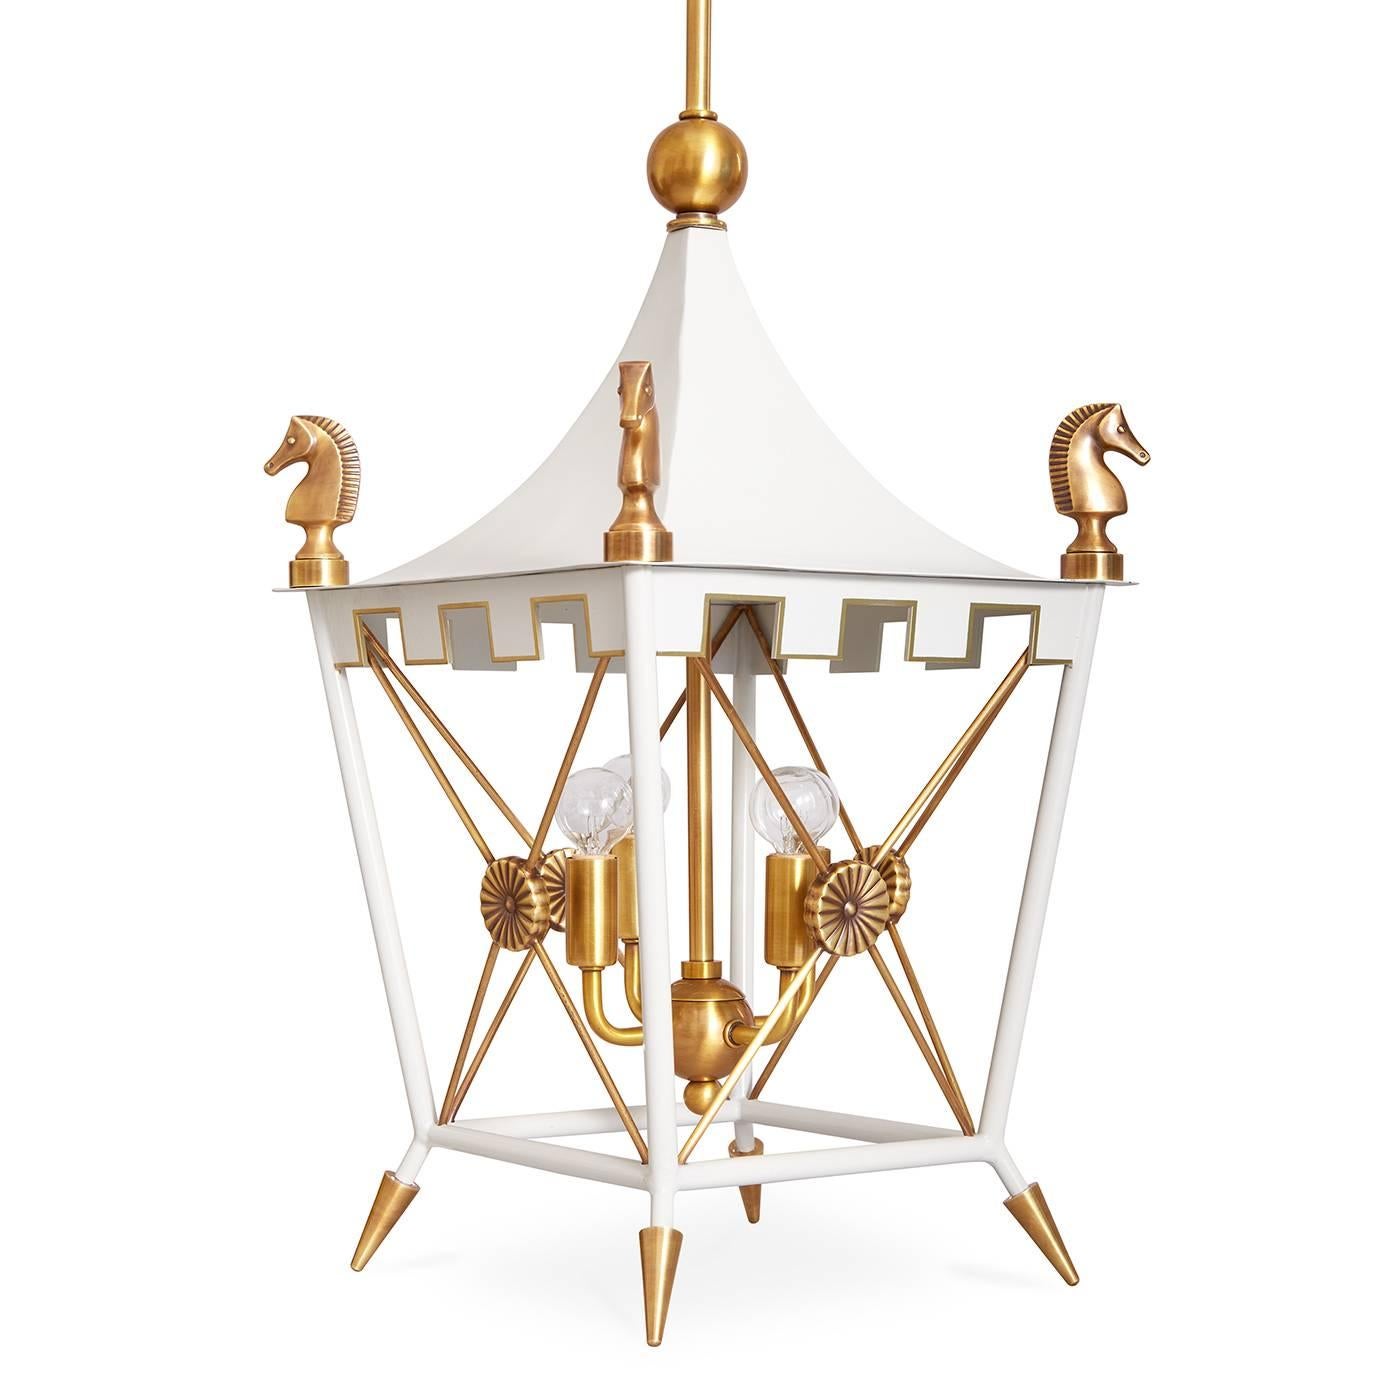 Parisian flair. The iconic pagoda pendant gets a neo neoclassical update. Our signature Rider accents abound: custom-crafted horse finials, powder-coated brass, antiqued brass medallions and turreted edges with gold hand-painted details for added